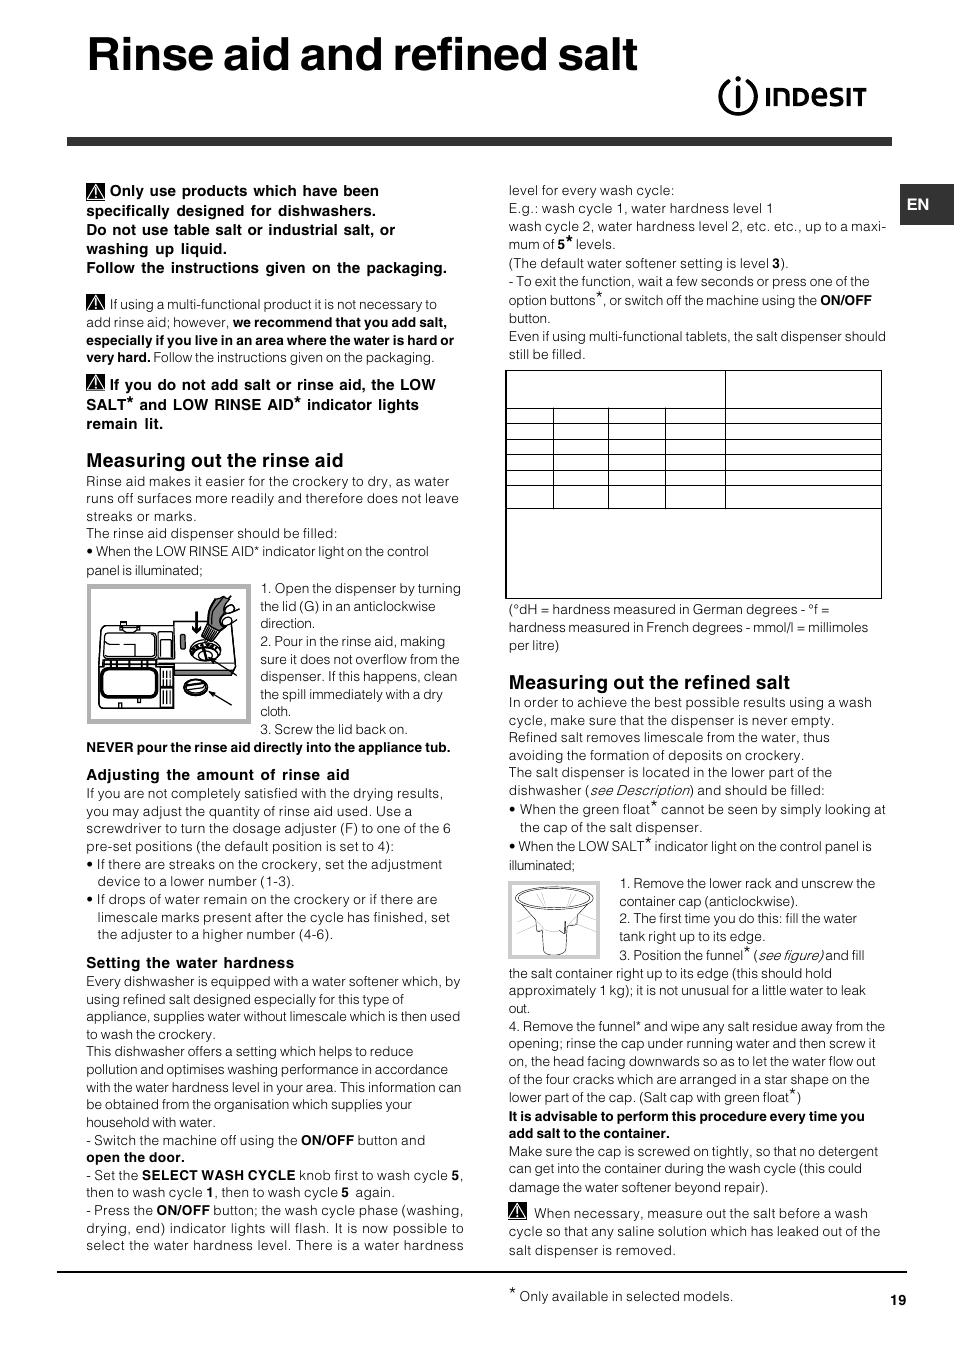 Rinse aid and refined salt, Measuring out the rinse aid, Measuring out the  refined salt | Indesit DFG 051 User Manual | Page 19 / 80